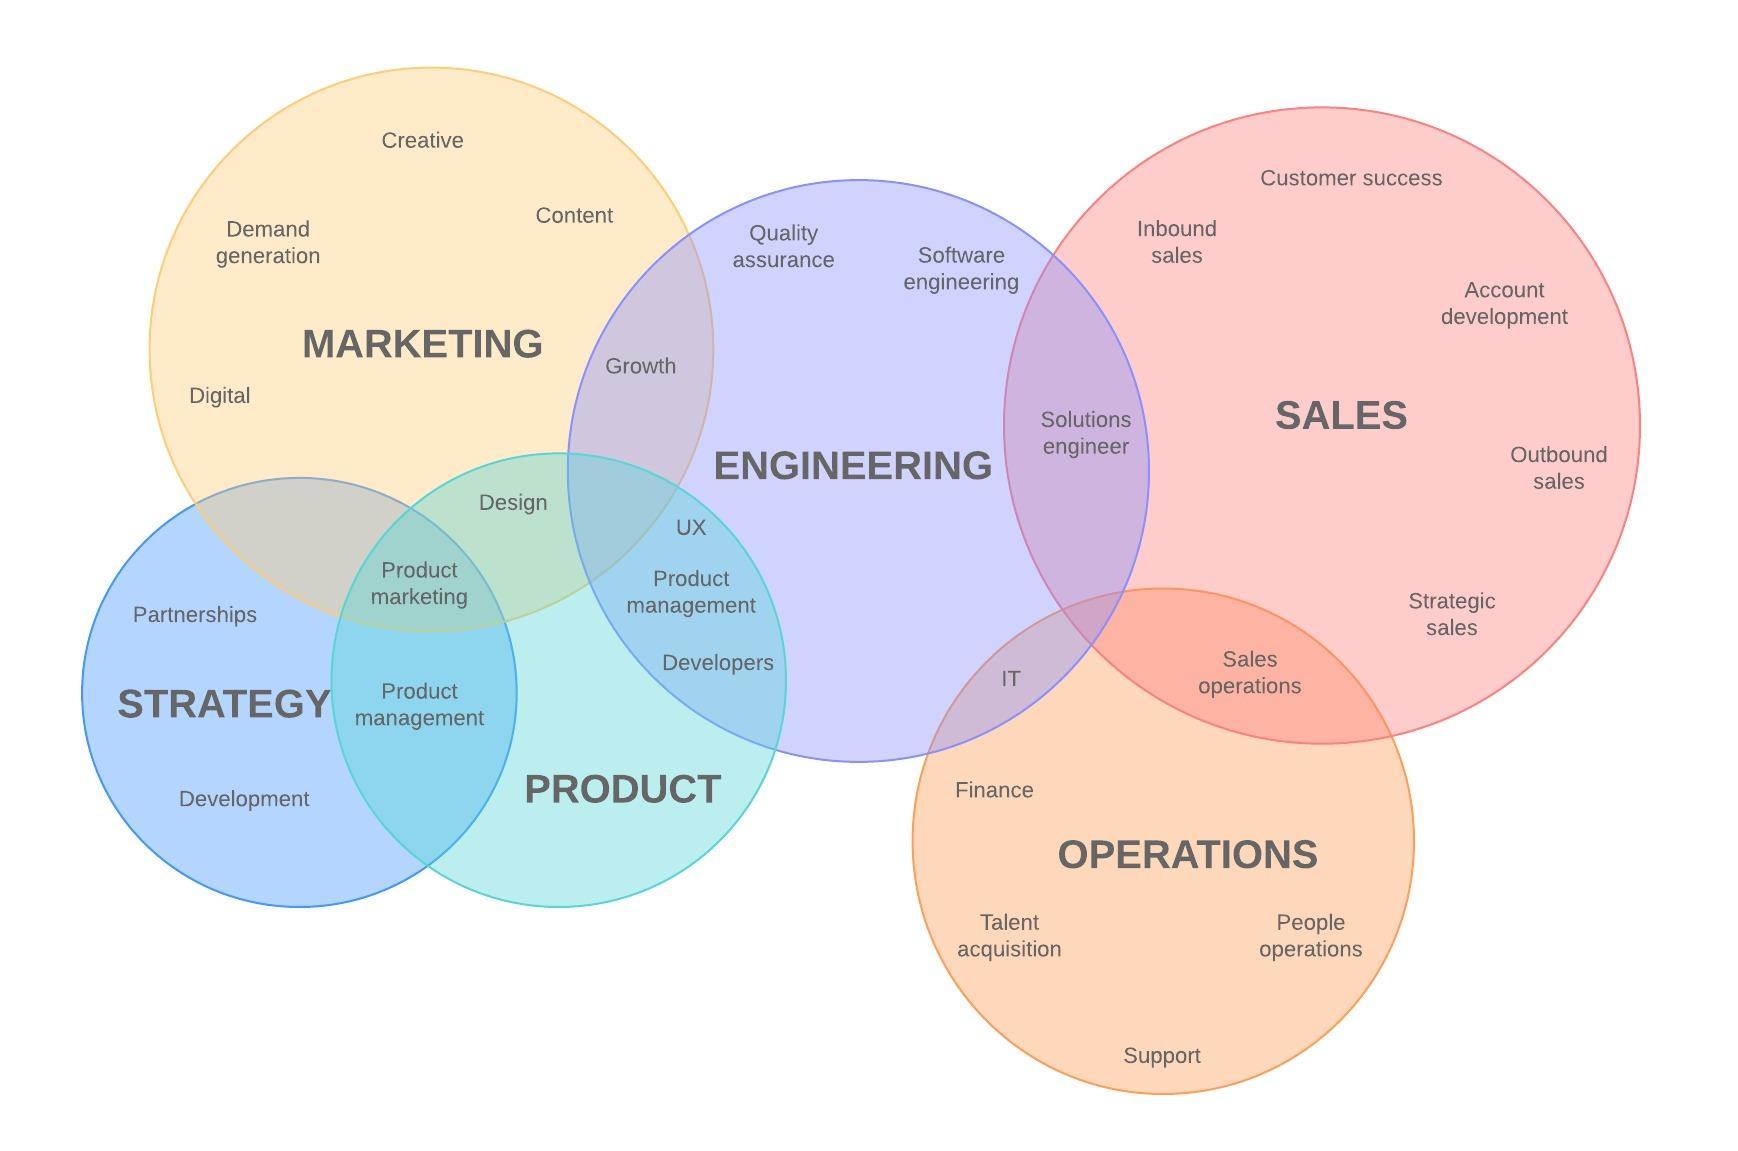 a Venn diagram showing different departments of a company and where they overlap